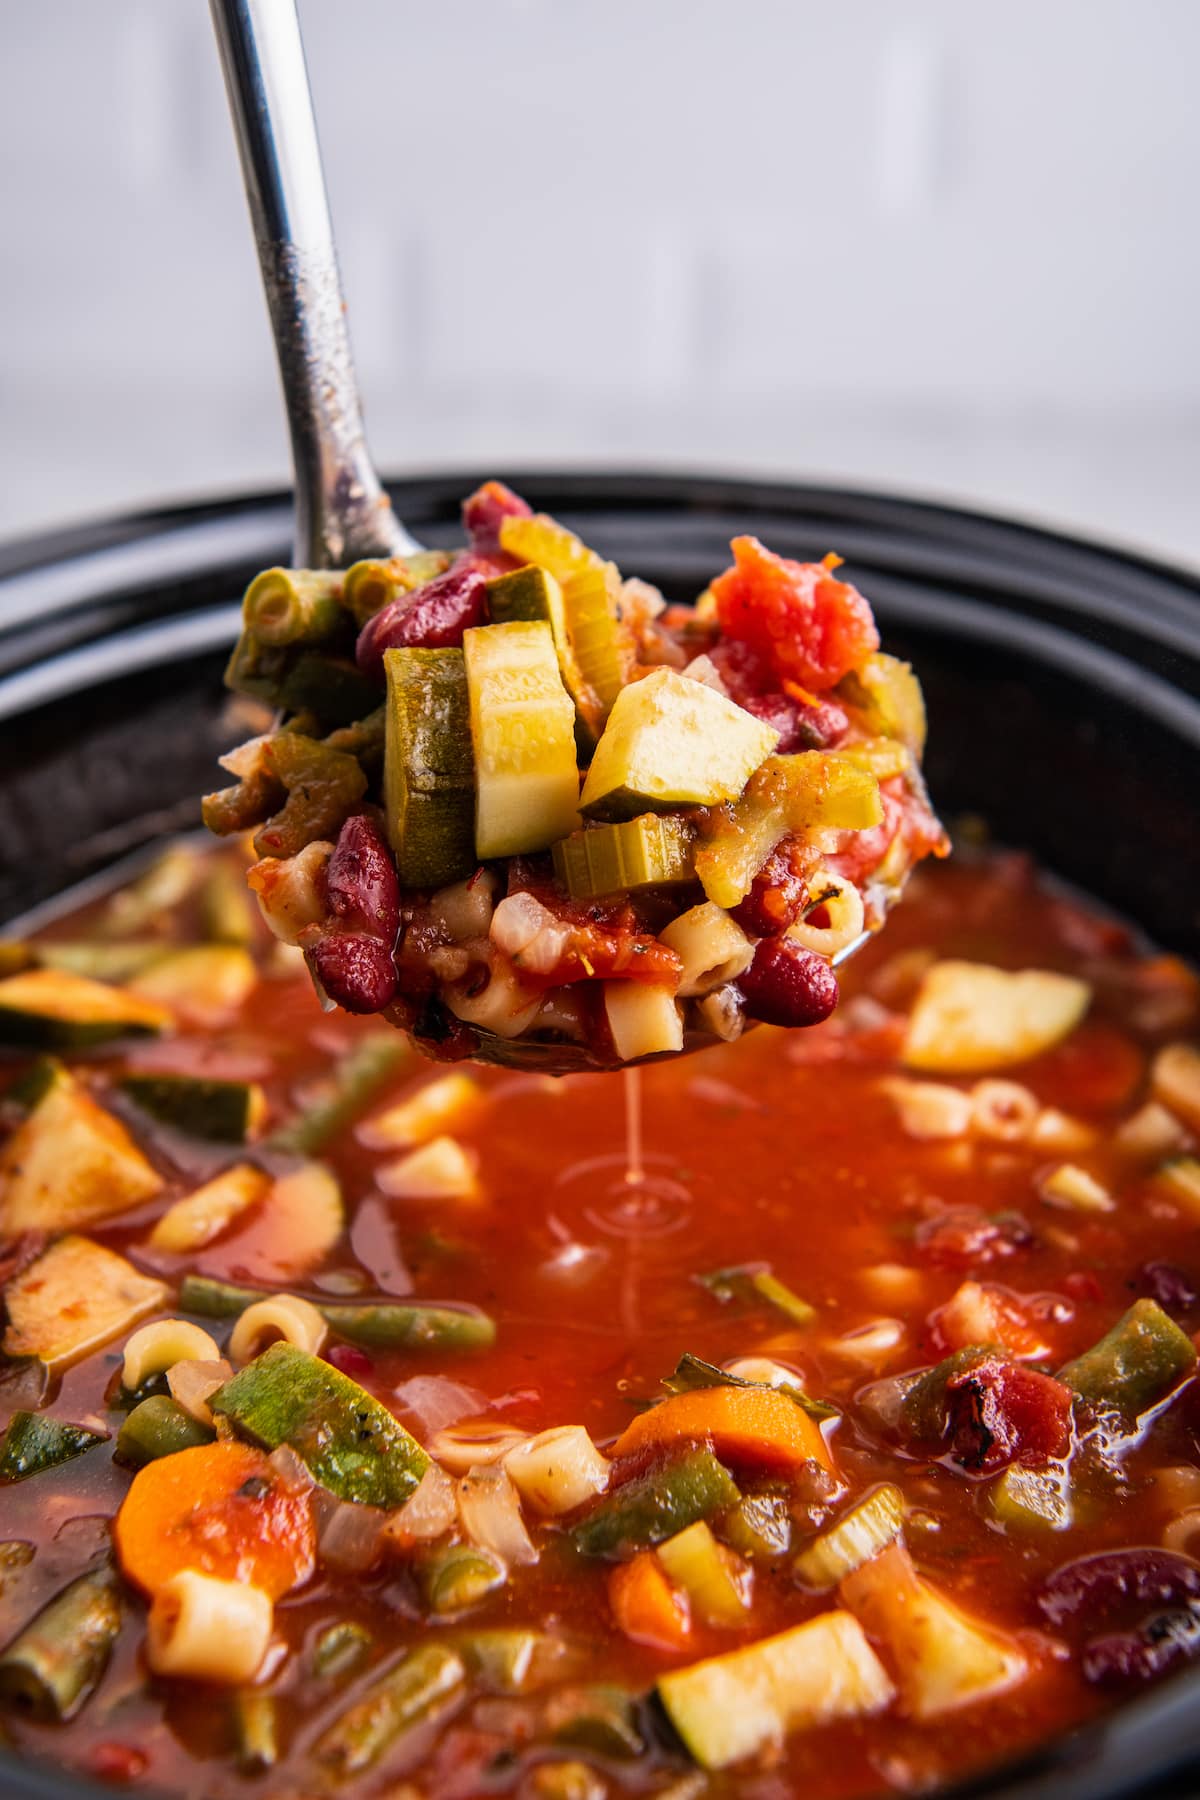 A ladle with a spoonful of minestrone soup from the crockpot.